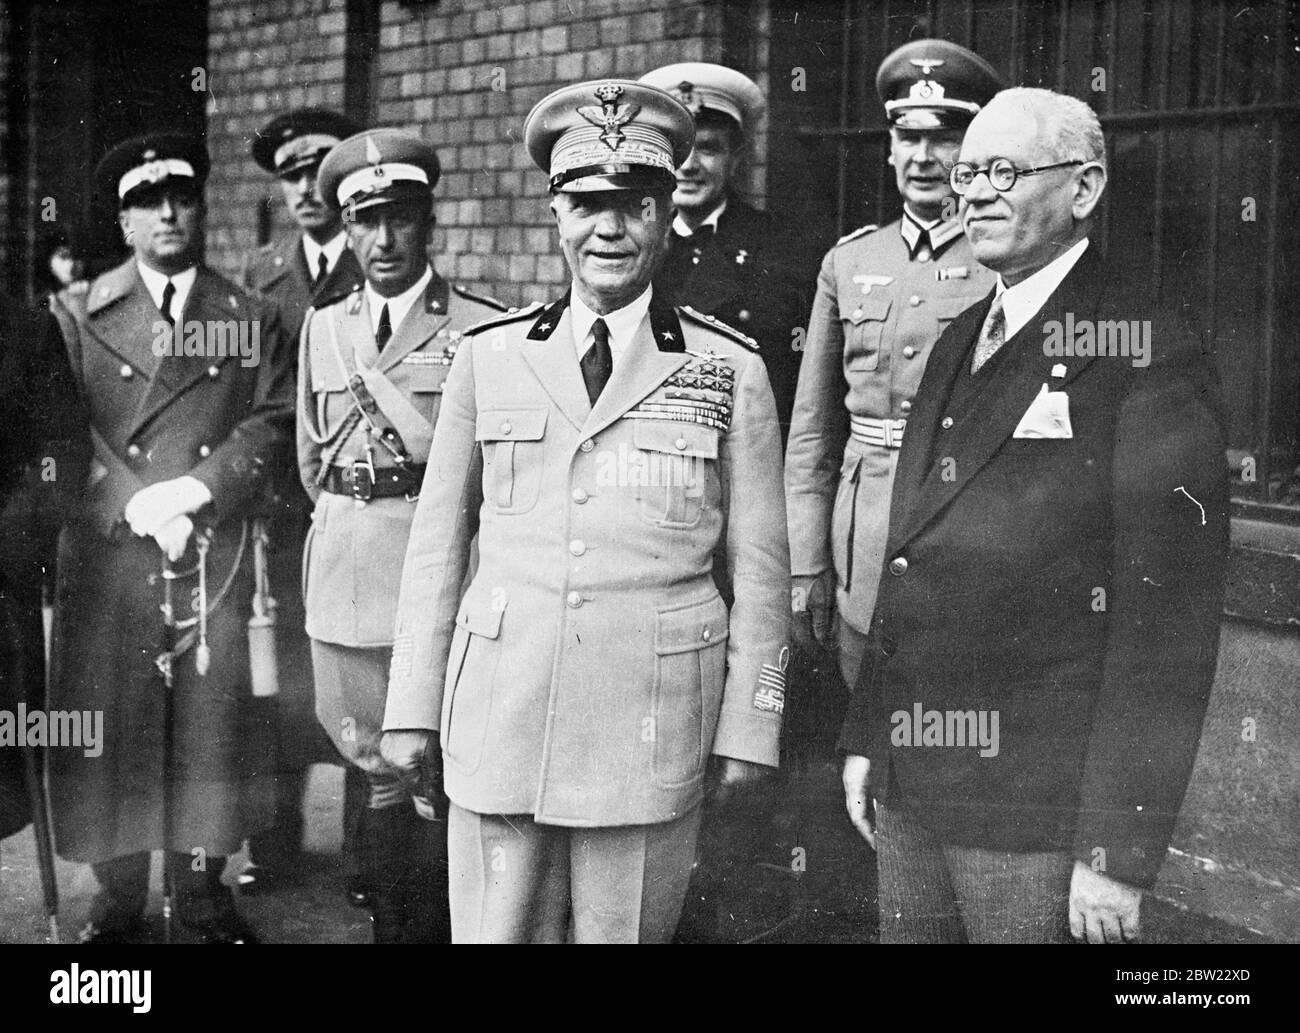 Marshal Badoglio, commander-in-chief of the Italian Army and conqueror of Abyssinia, arrived in Berlin to be the guest of German War Minister, Field Marshall von Blomberg at the German Army manoeuvres. The Marshall with Signor Attolico, the Italian Ambassador (right) on his arrival. 22 September 1937 Stock Photo